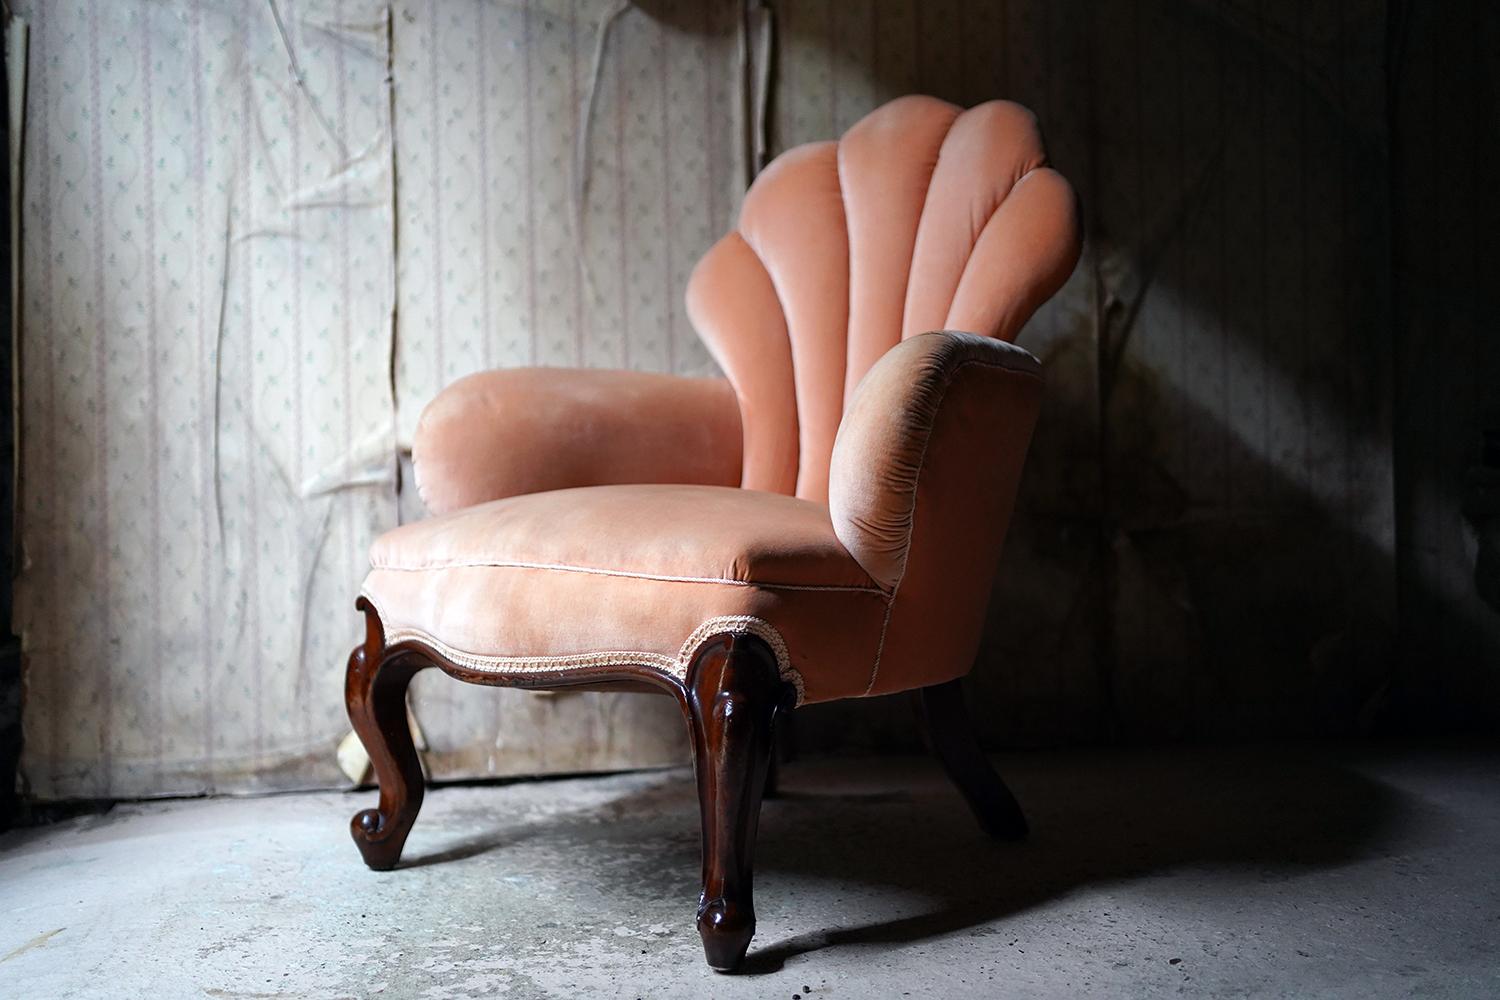 The shell or scalloped shaped parlour chair, in a peach coloured fabric with single piping, having a five fanned back with shaped arms and shaped apron to cabriole legs, the whole surviving from the second quarter of the nineteenth century.

In